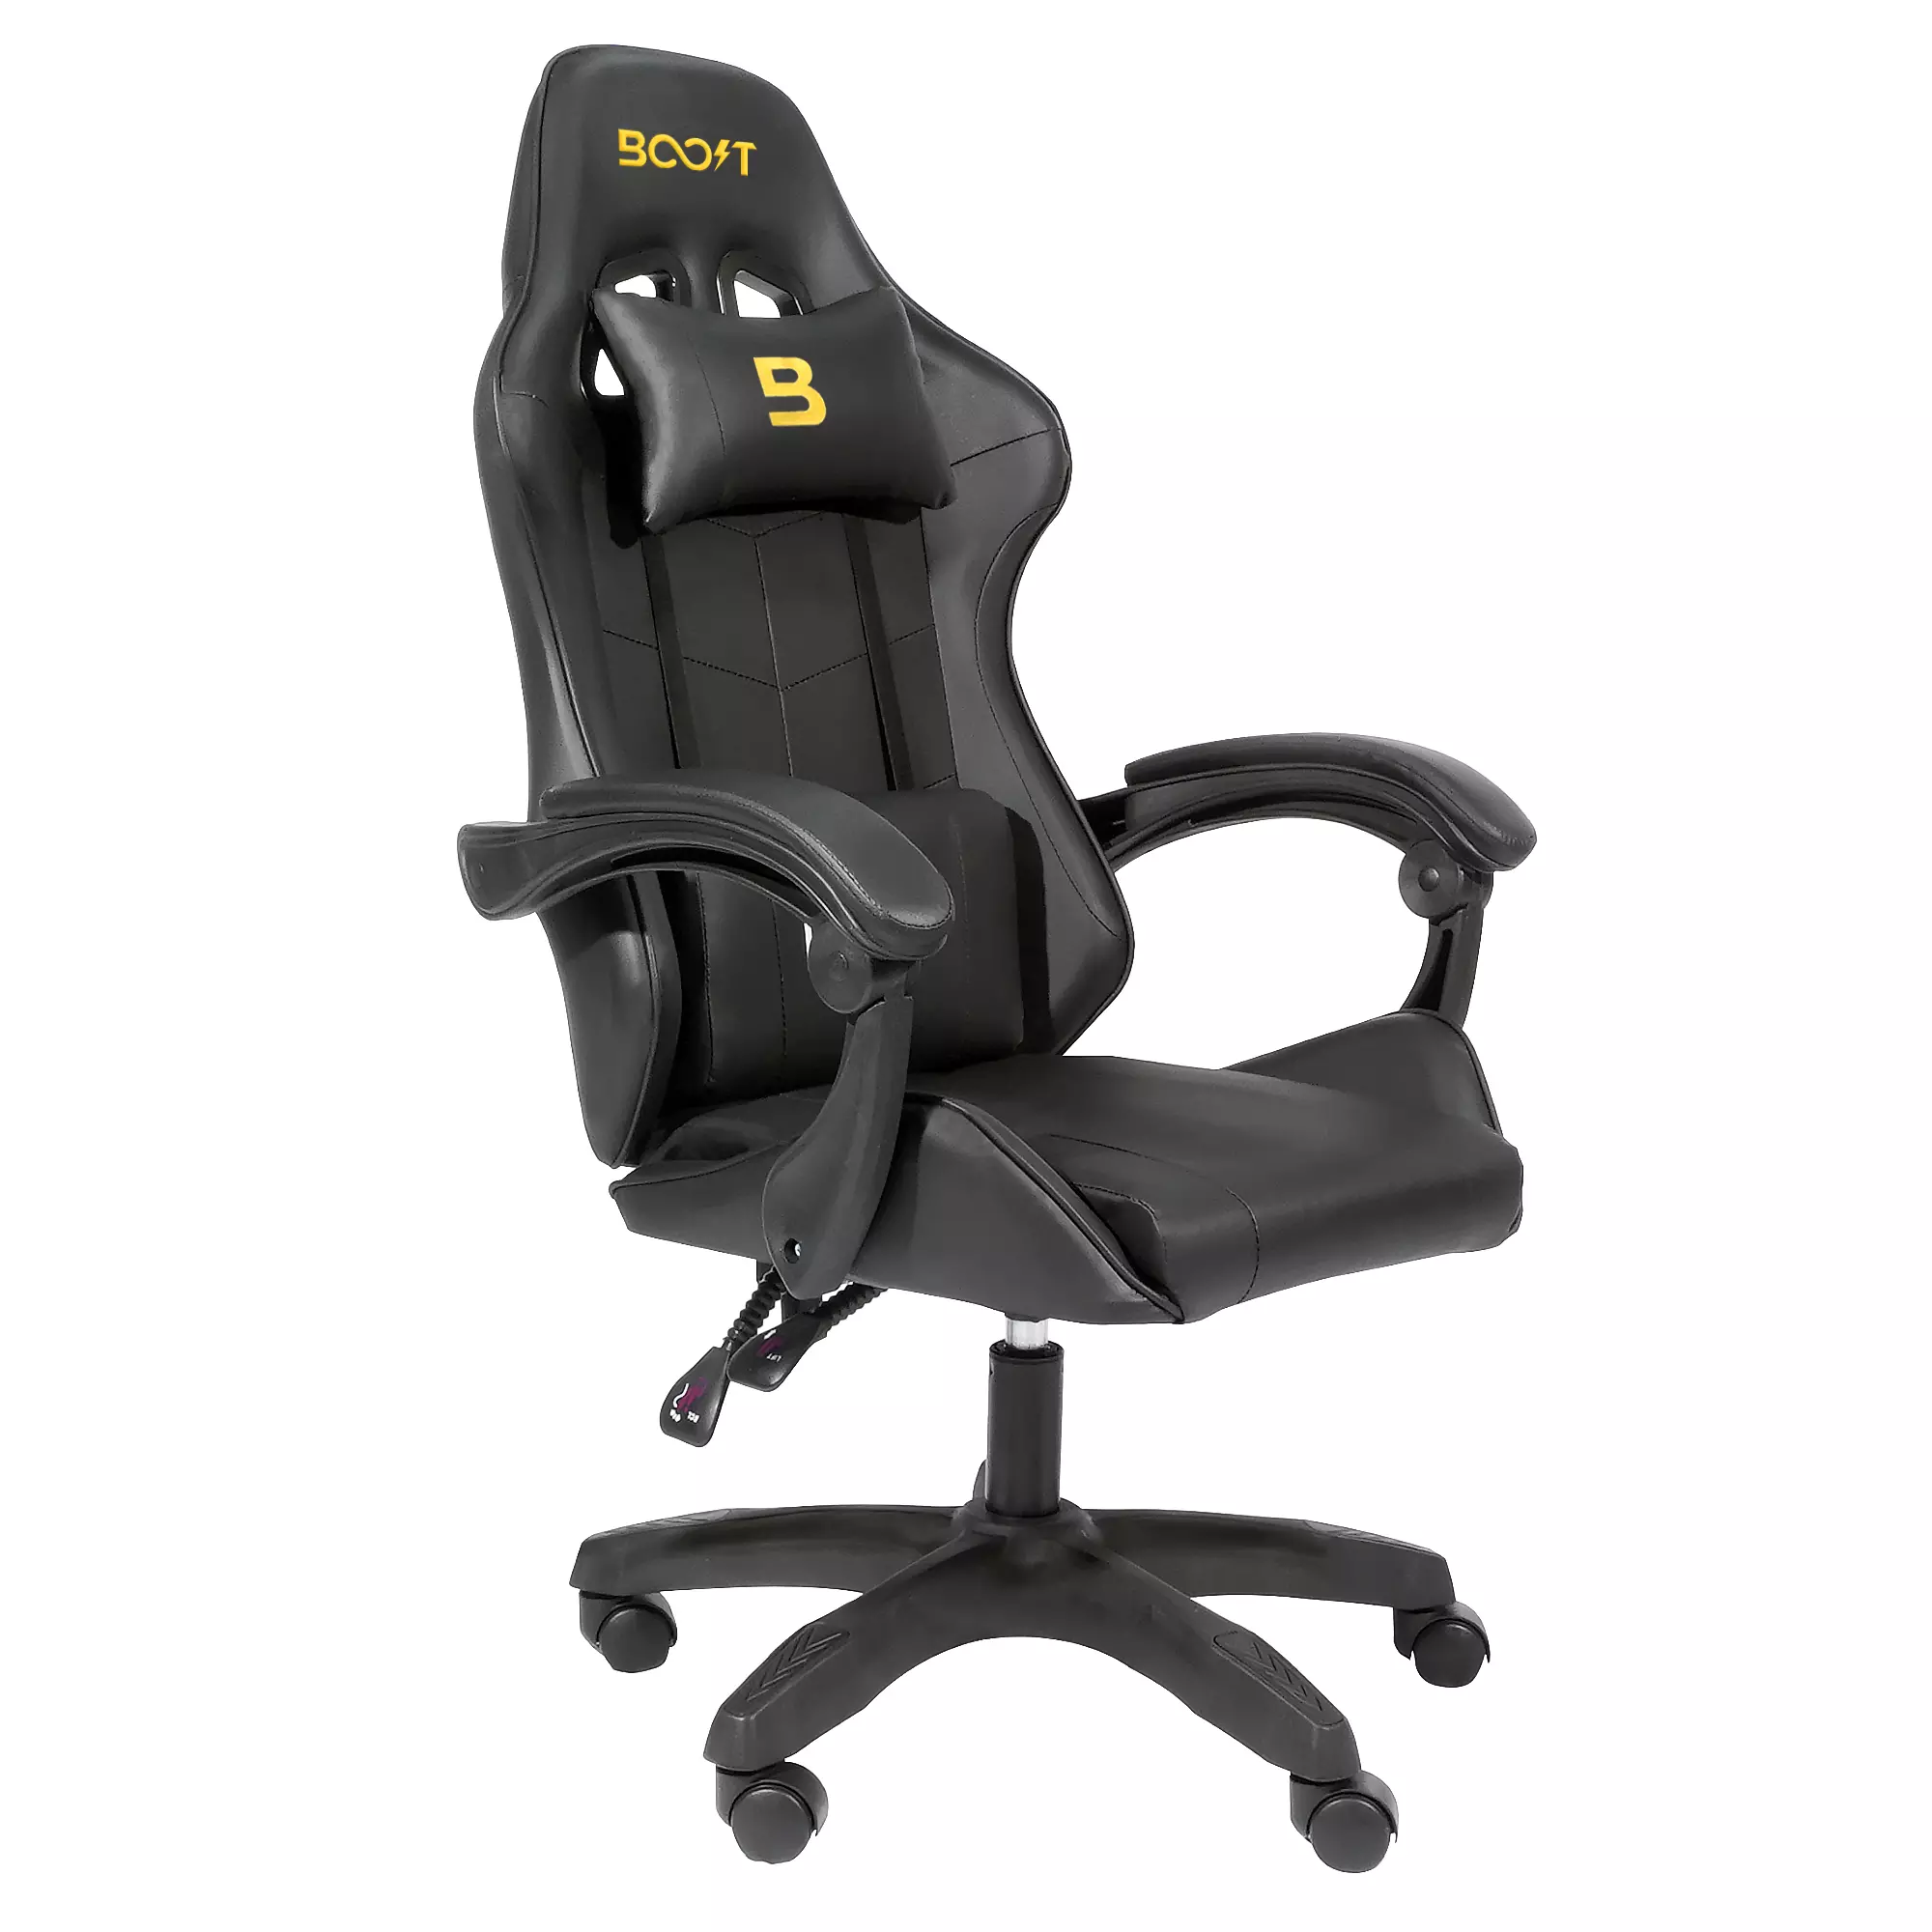 Boost Velocity Gaming Chair - Black